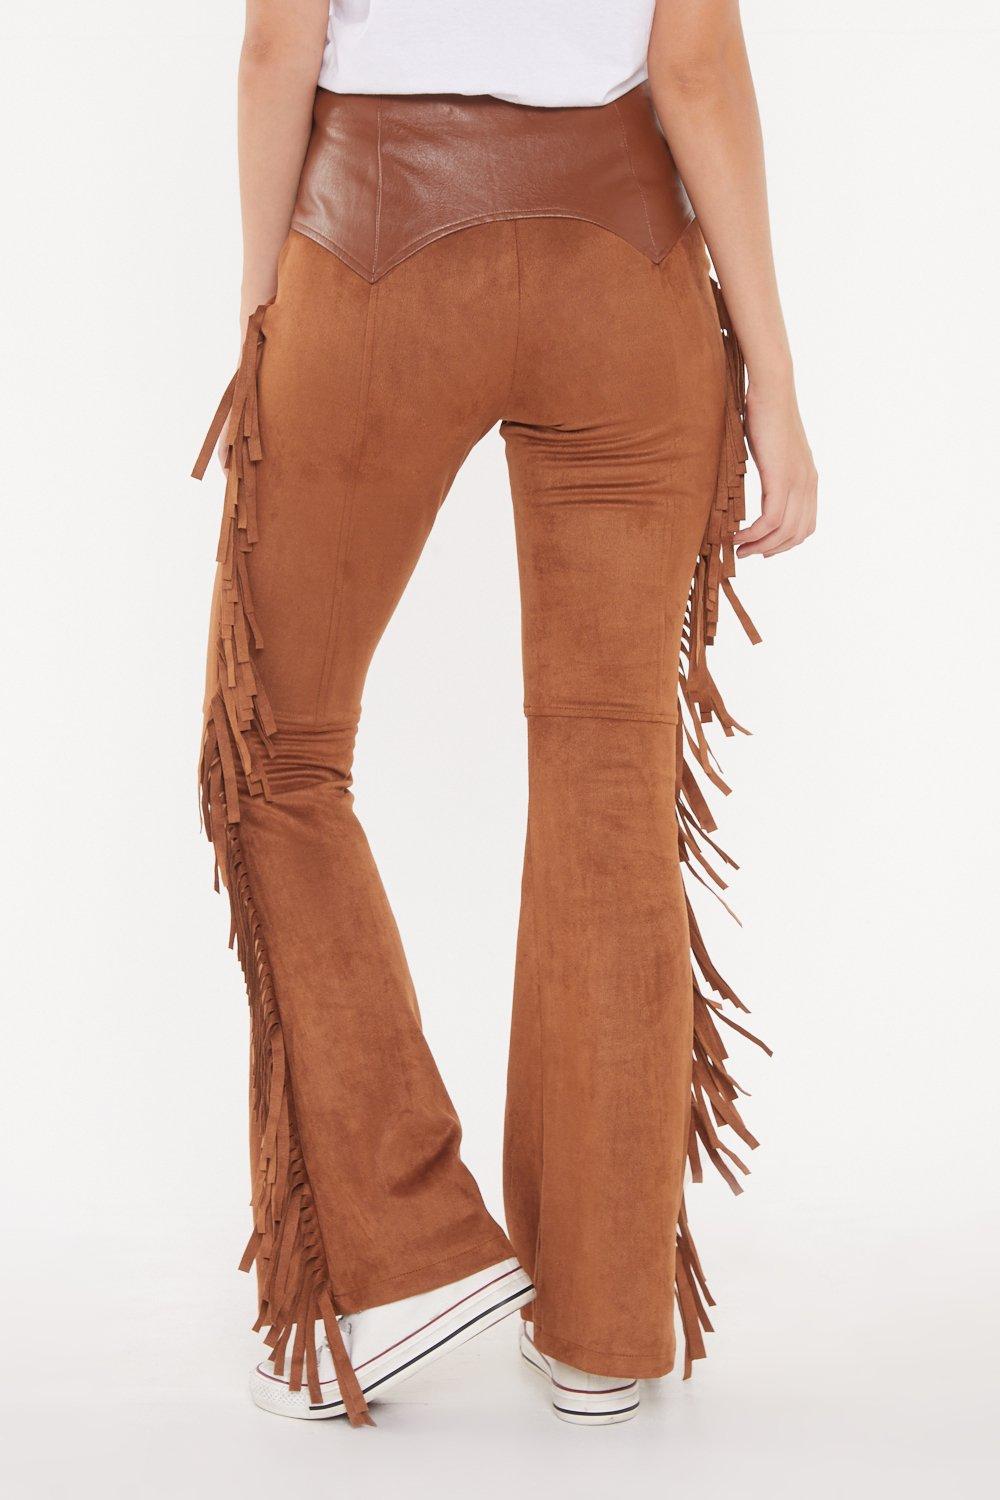 Brown Exposed Seam Flare Suede Pants with Pockets – TFC&H Co.